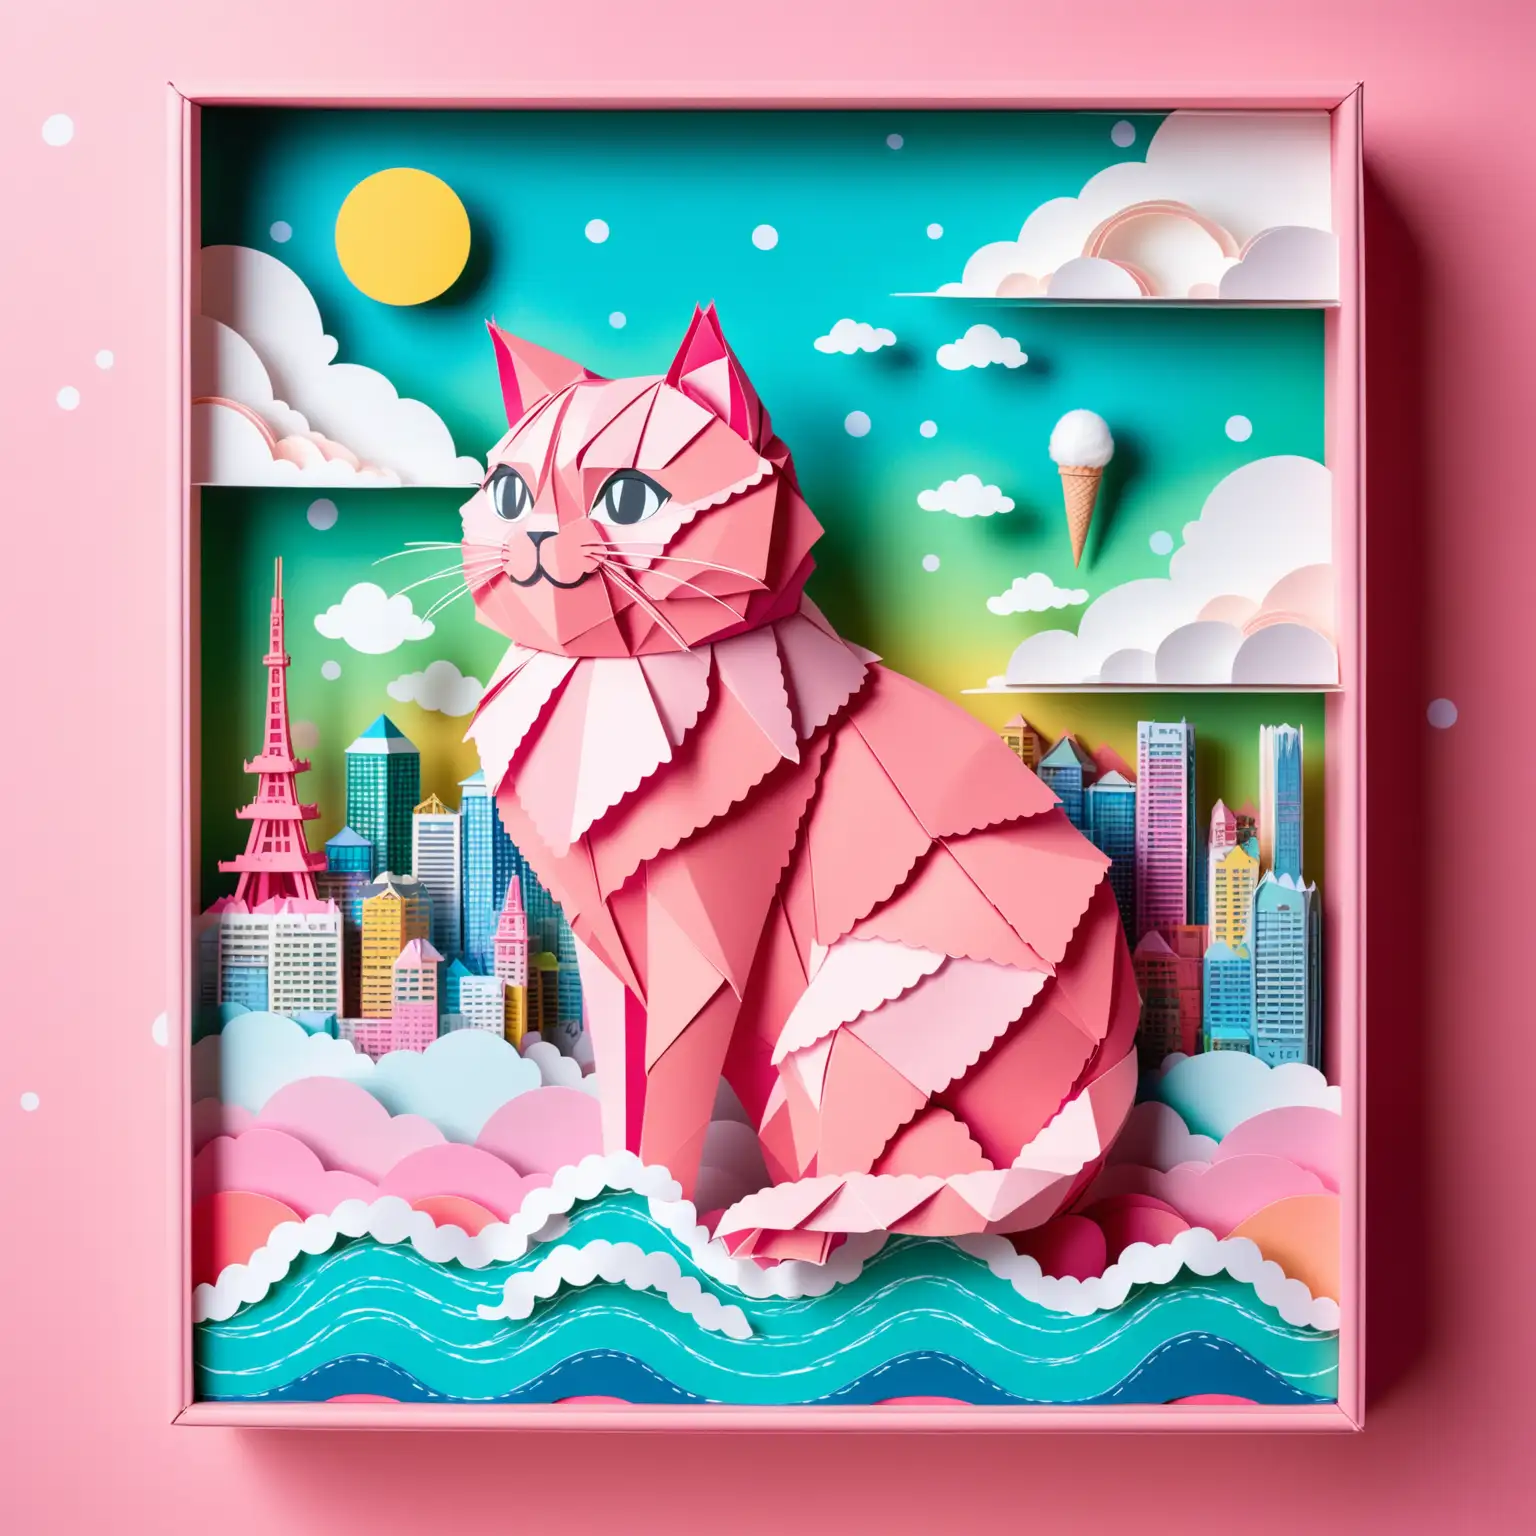 Abstract art paper art origami diorama of ghibli inspired image of a beautiful giant pink cat,smiling expression, in tokyo skyline, with clouds like waves and bubbles and sunshine and cotton candy and ice cream details.